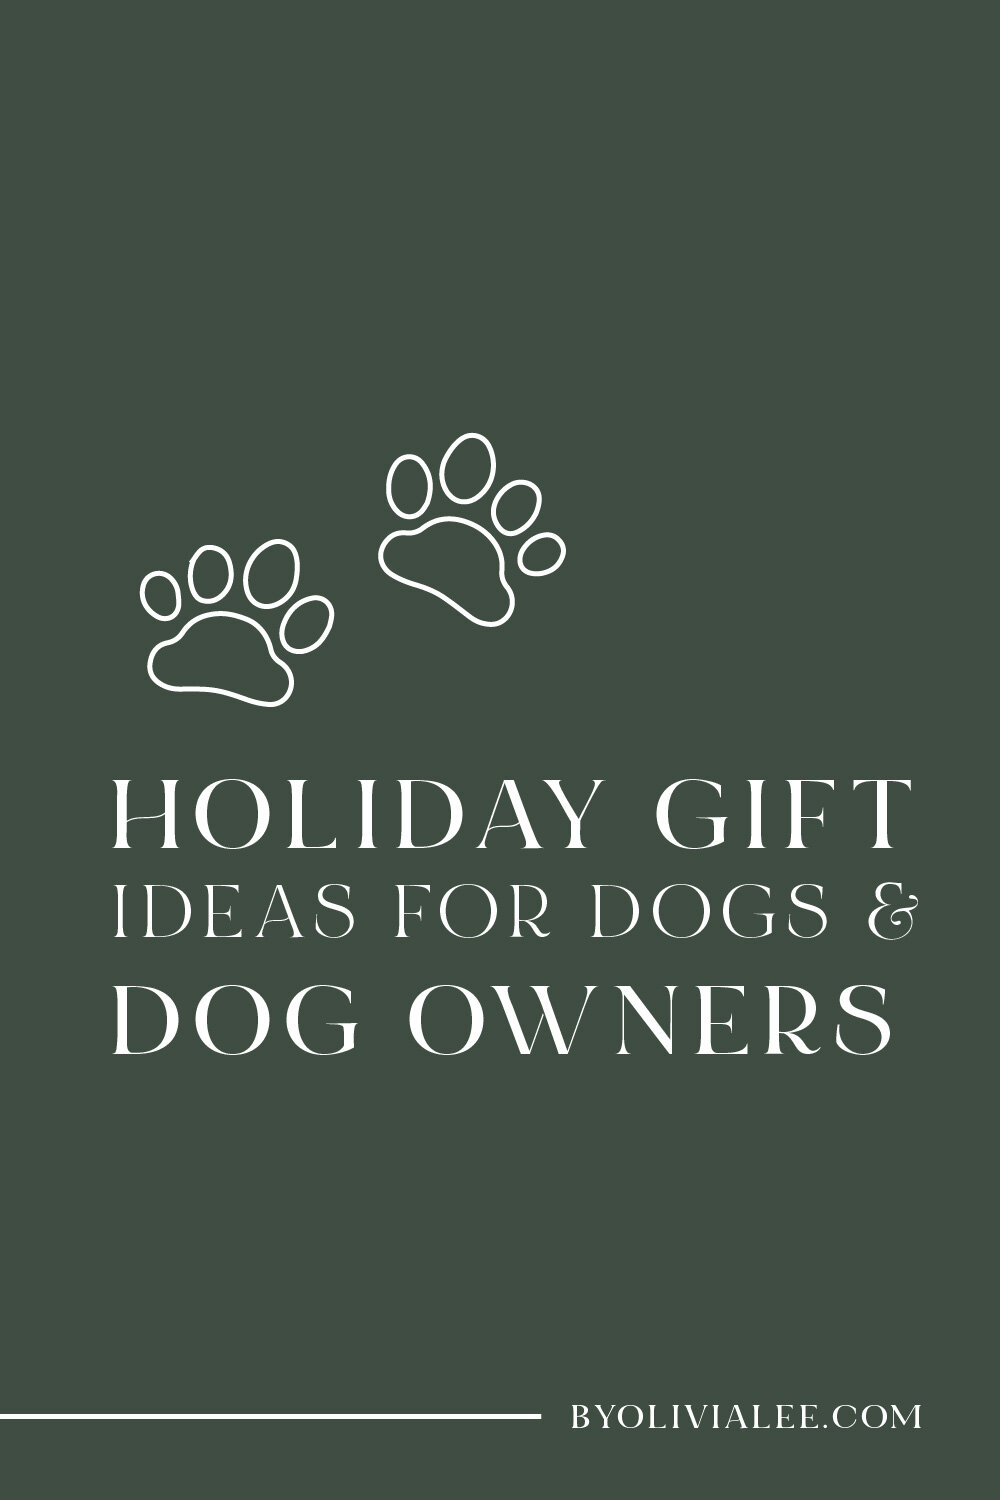 Holiday Gift Ideas For Dogs-11.jpg